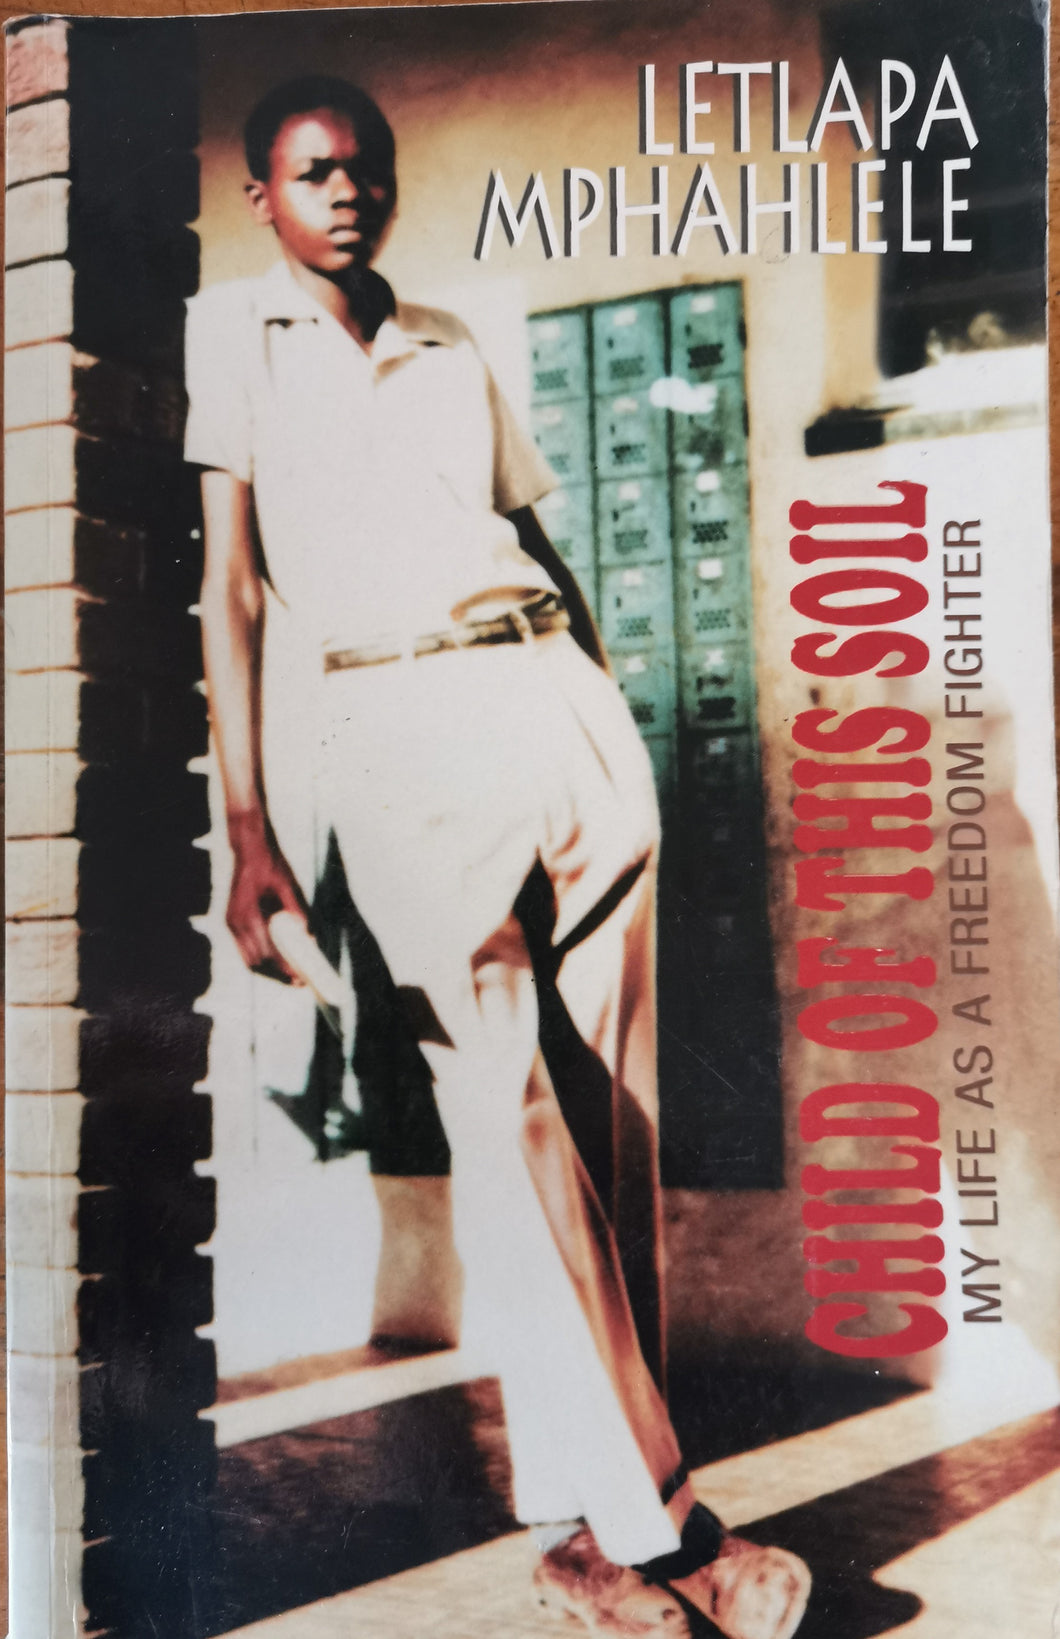 Letlapa Mphahlele - Child of this Soil: My Life as a Freedom Fighter